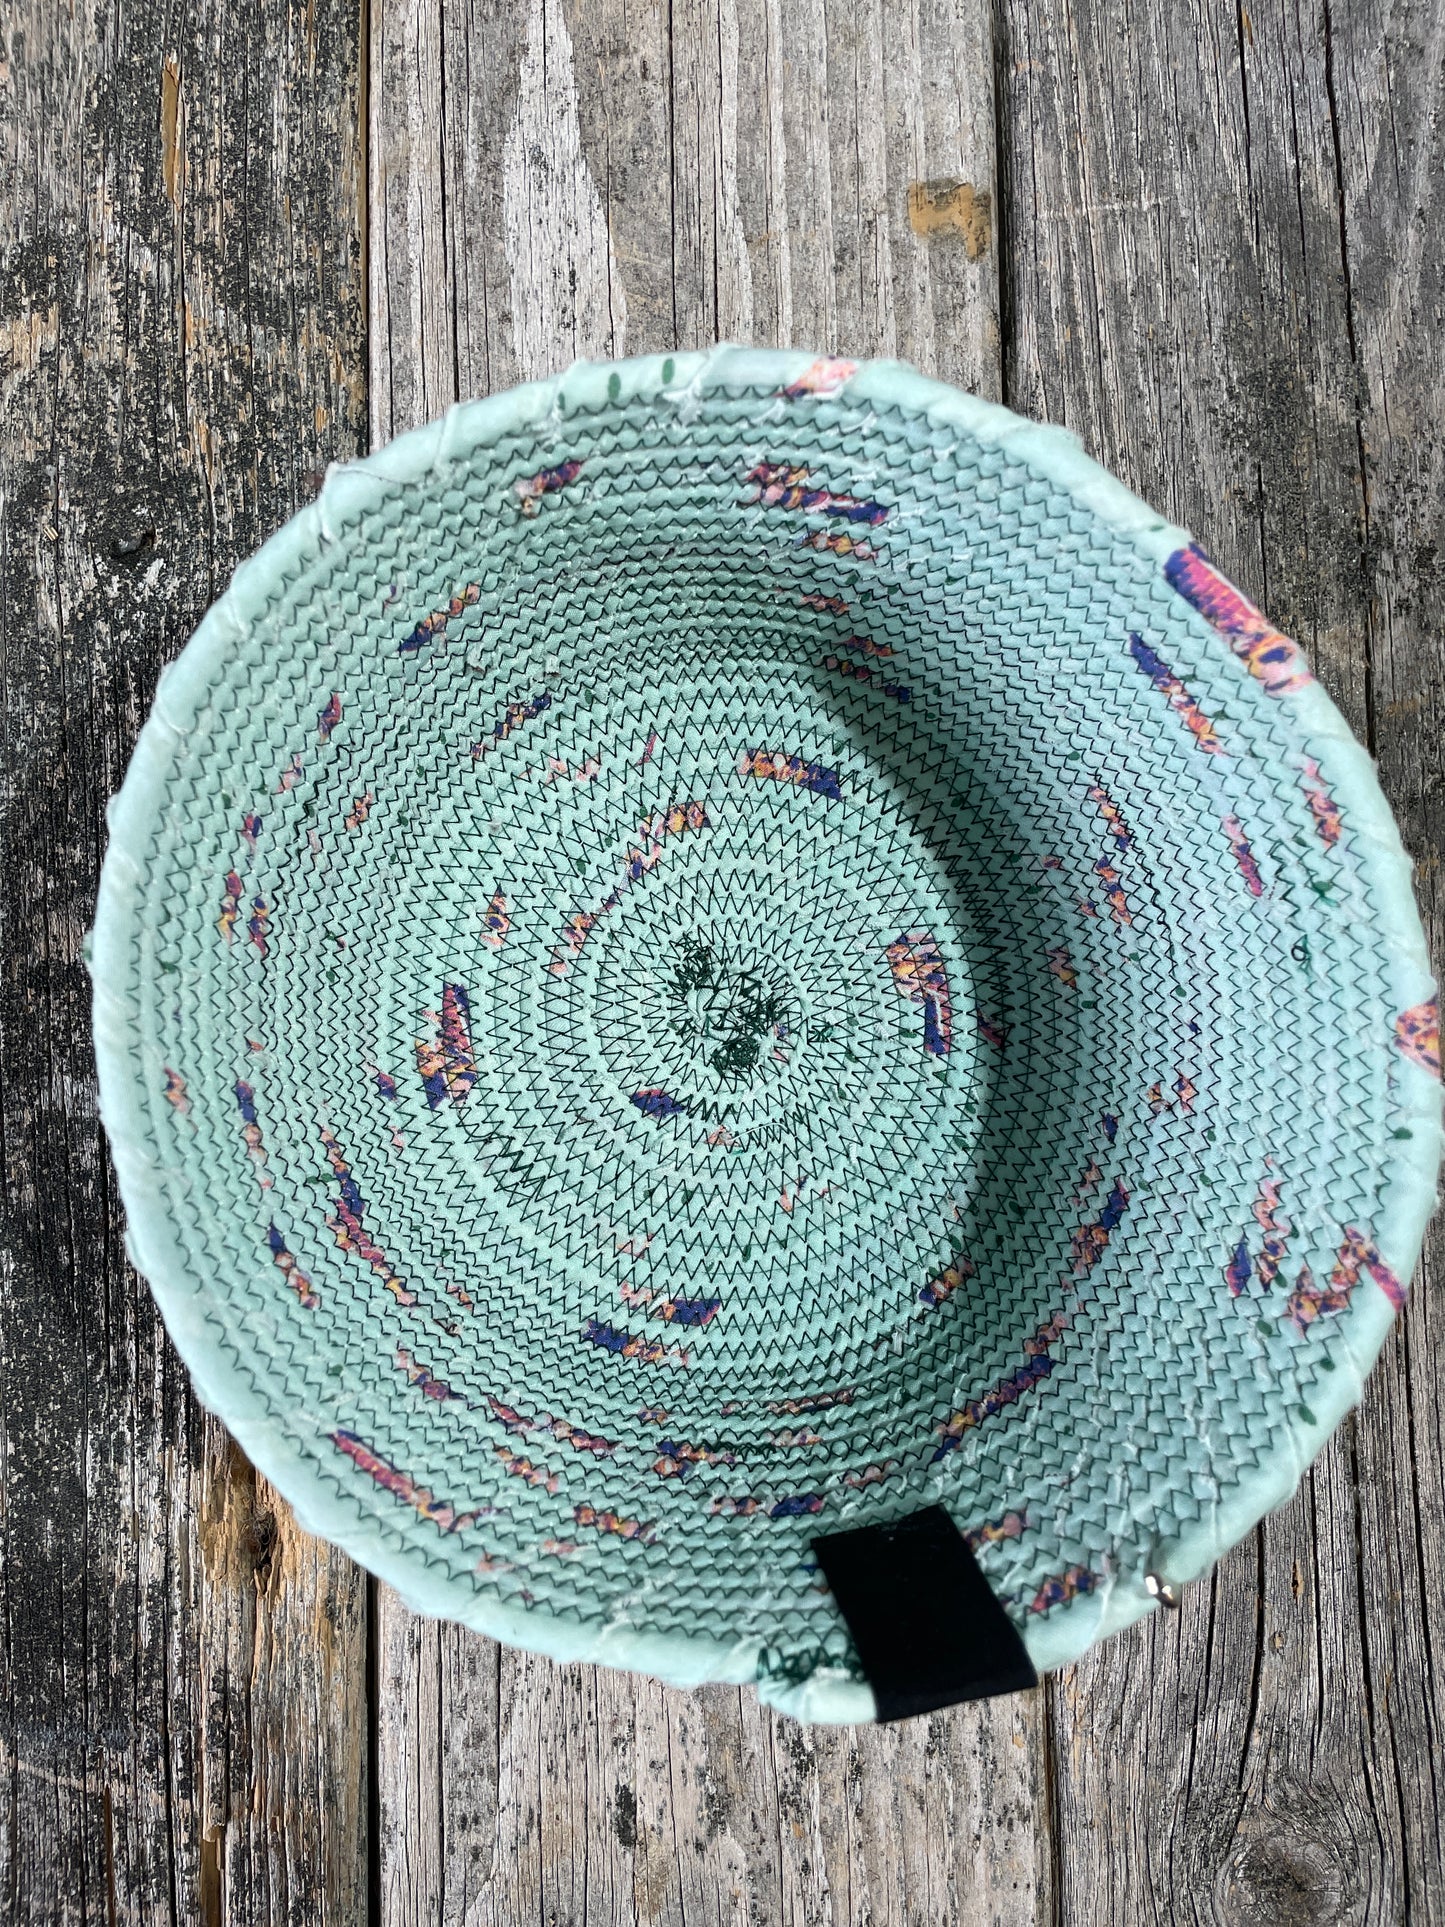 Frozen Custard - Handmade Fabric/Rope Project Bowls by TkPomroy/The Wooly Ghost